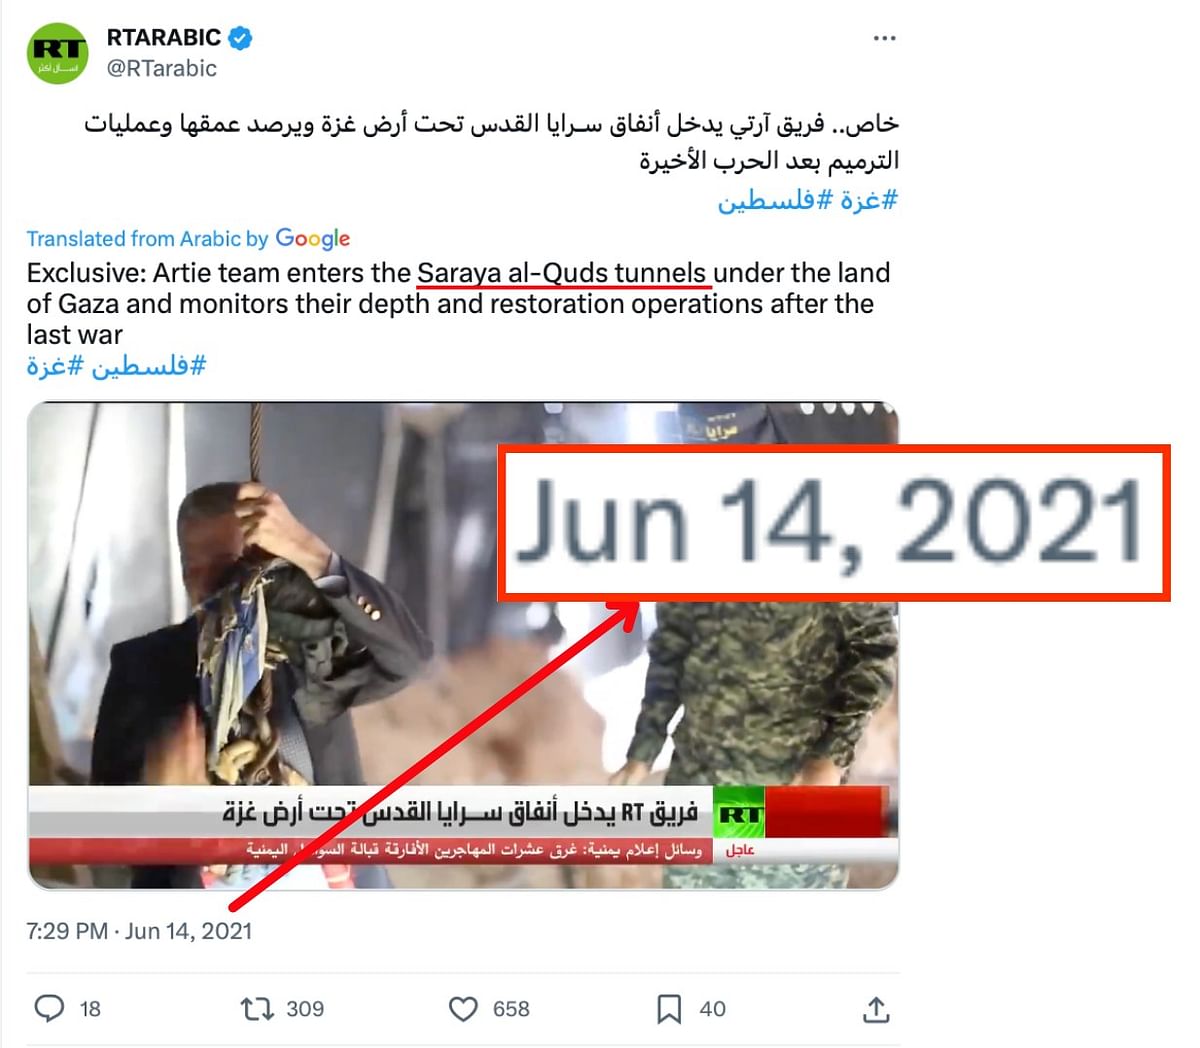 The video dates back to June 2021 and shows an RT journalist inside Al-Quds Brigade tunnels under Gaza.